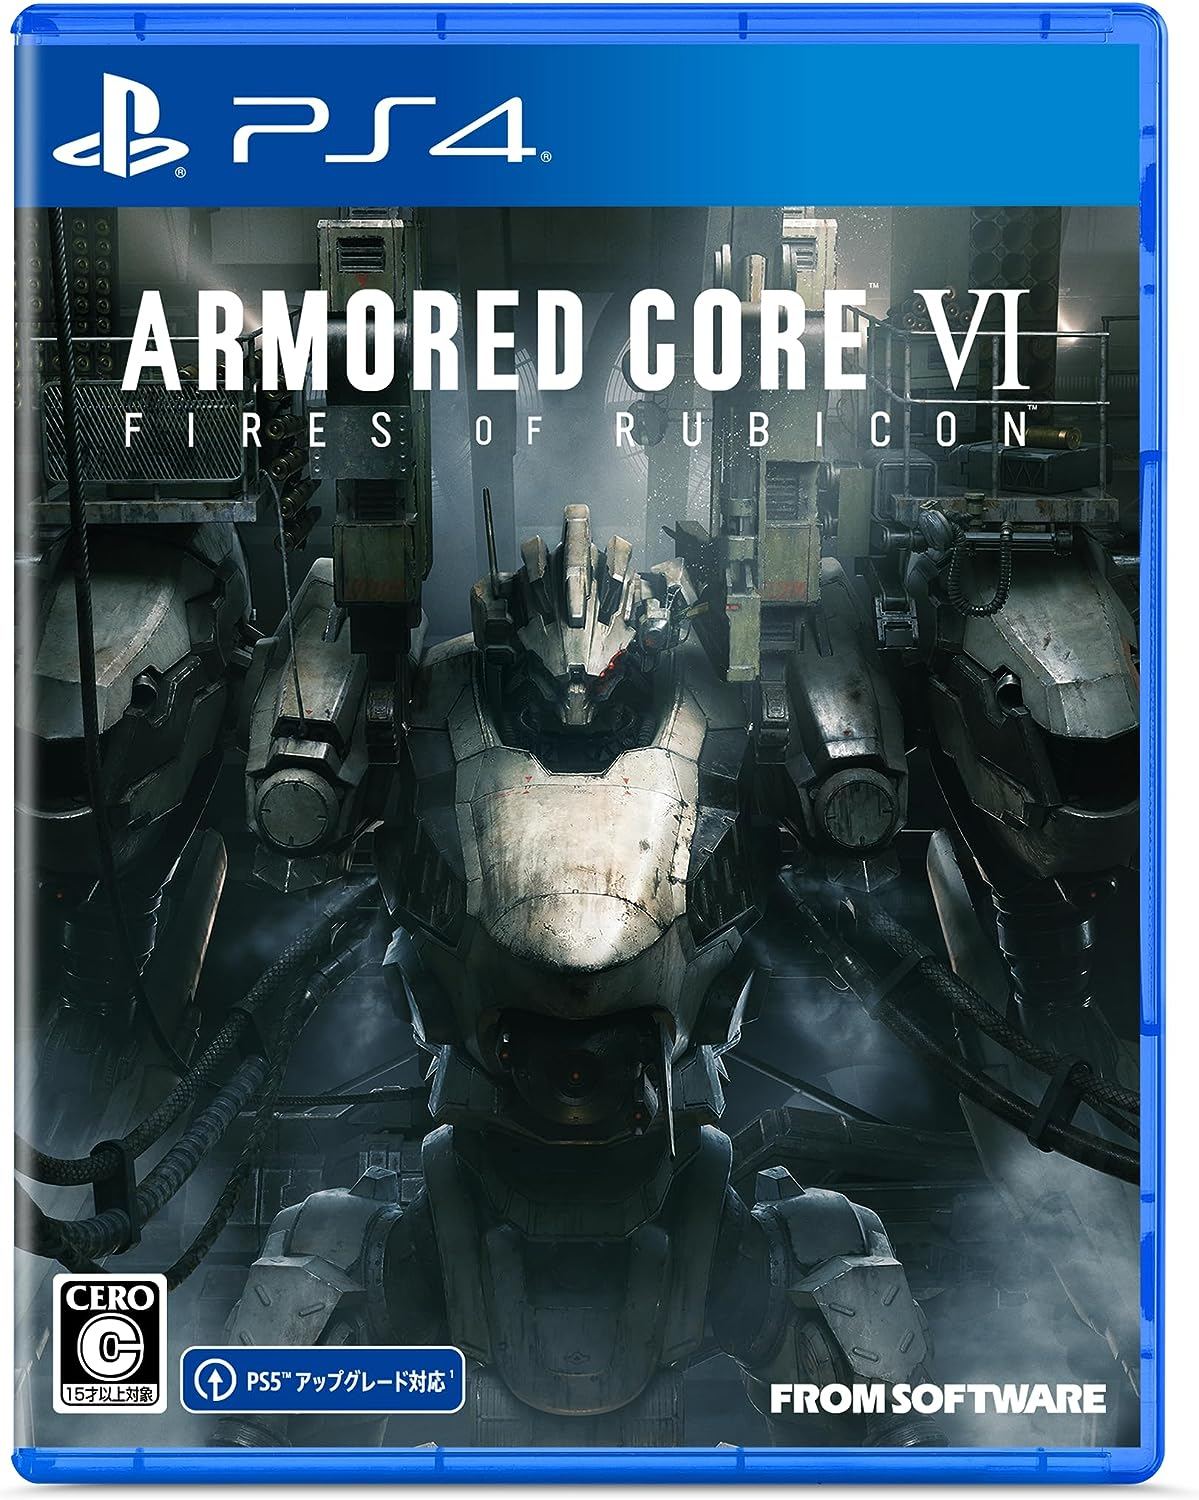 ARMORED CORE VI FIRES OF RUBICON” Releasing Worldwide on 25th